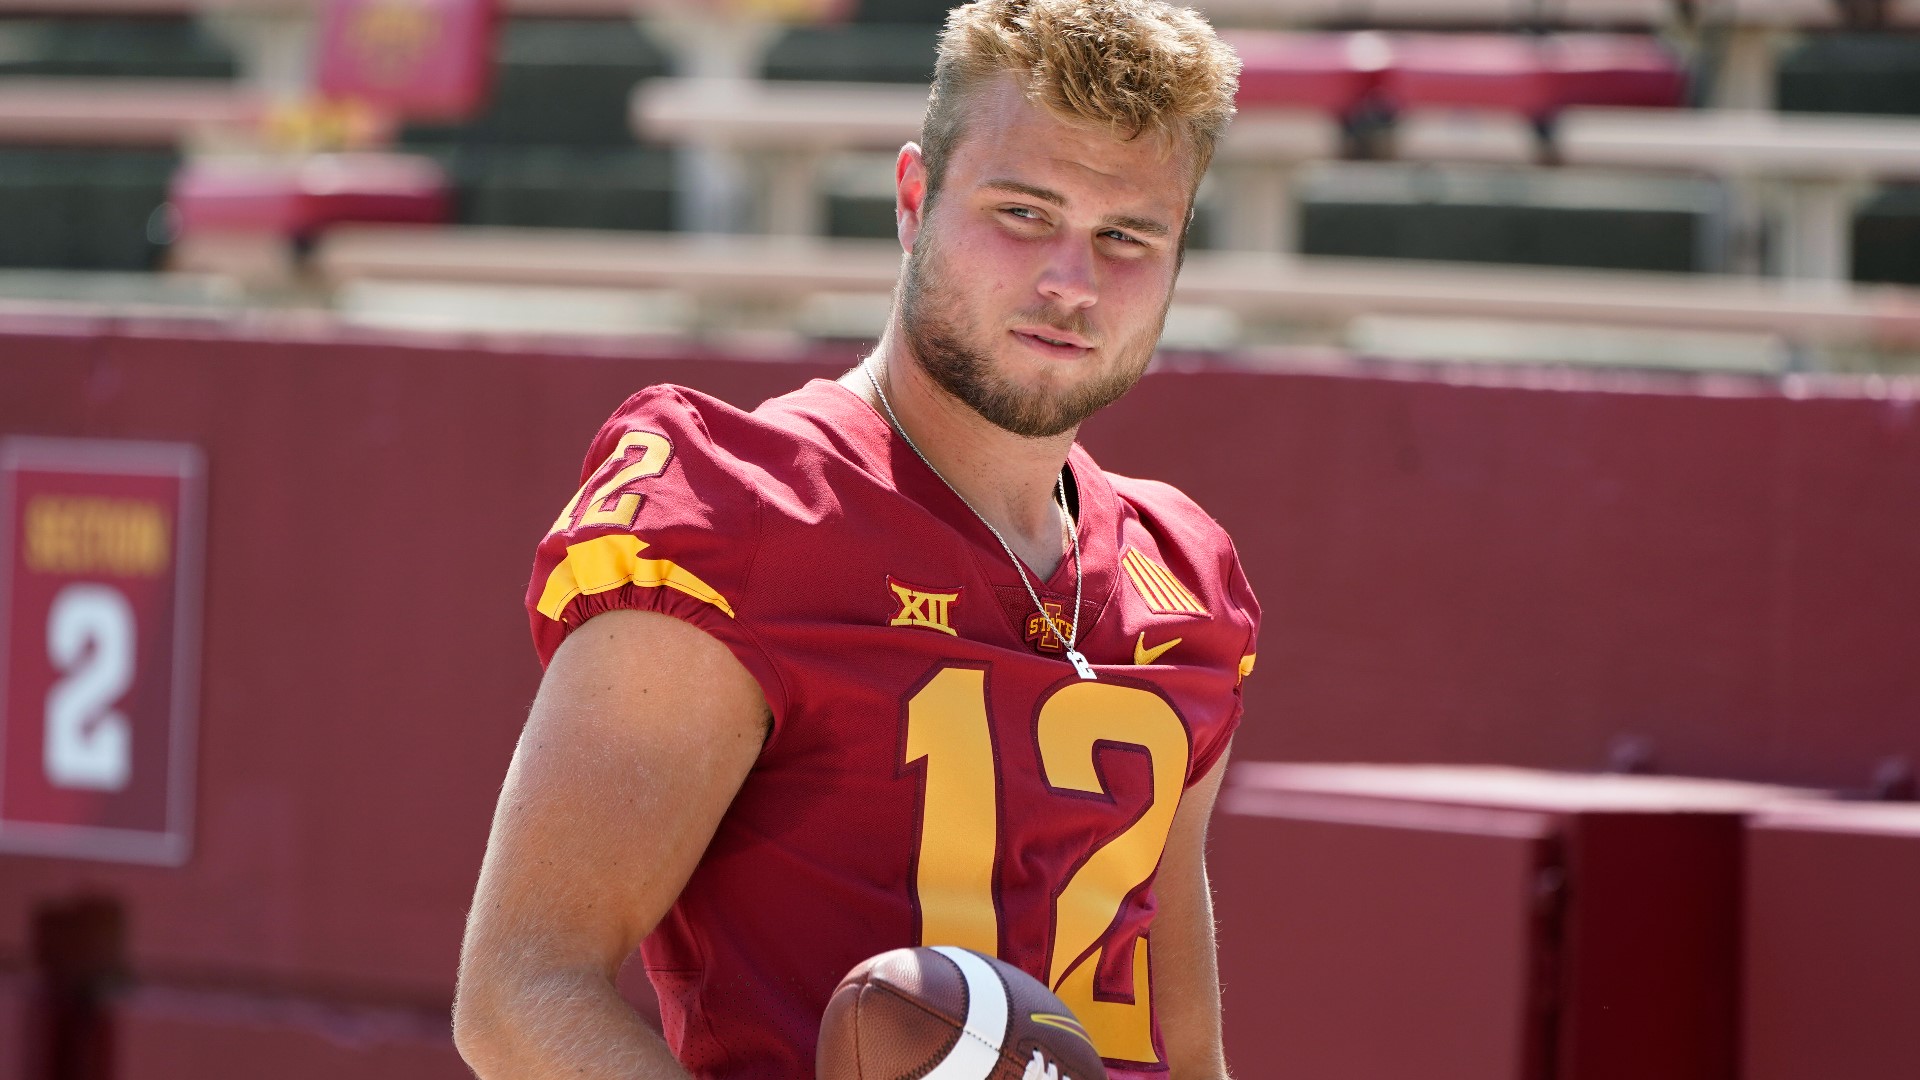 Dekkers, who was on the Cyclones football squad from 2020-2023, allegedly concealed his true identity and placed 26 wagers on ISU sporting events.